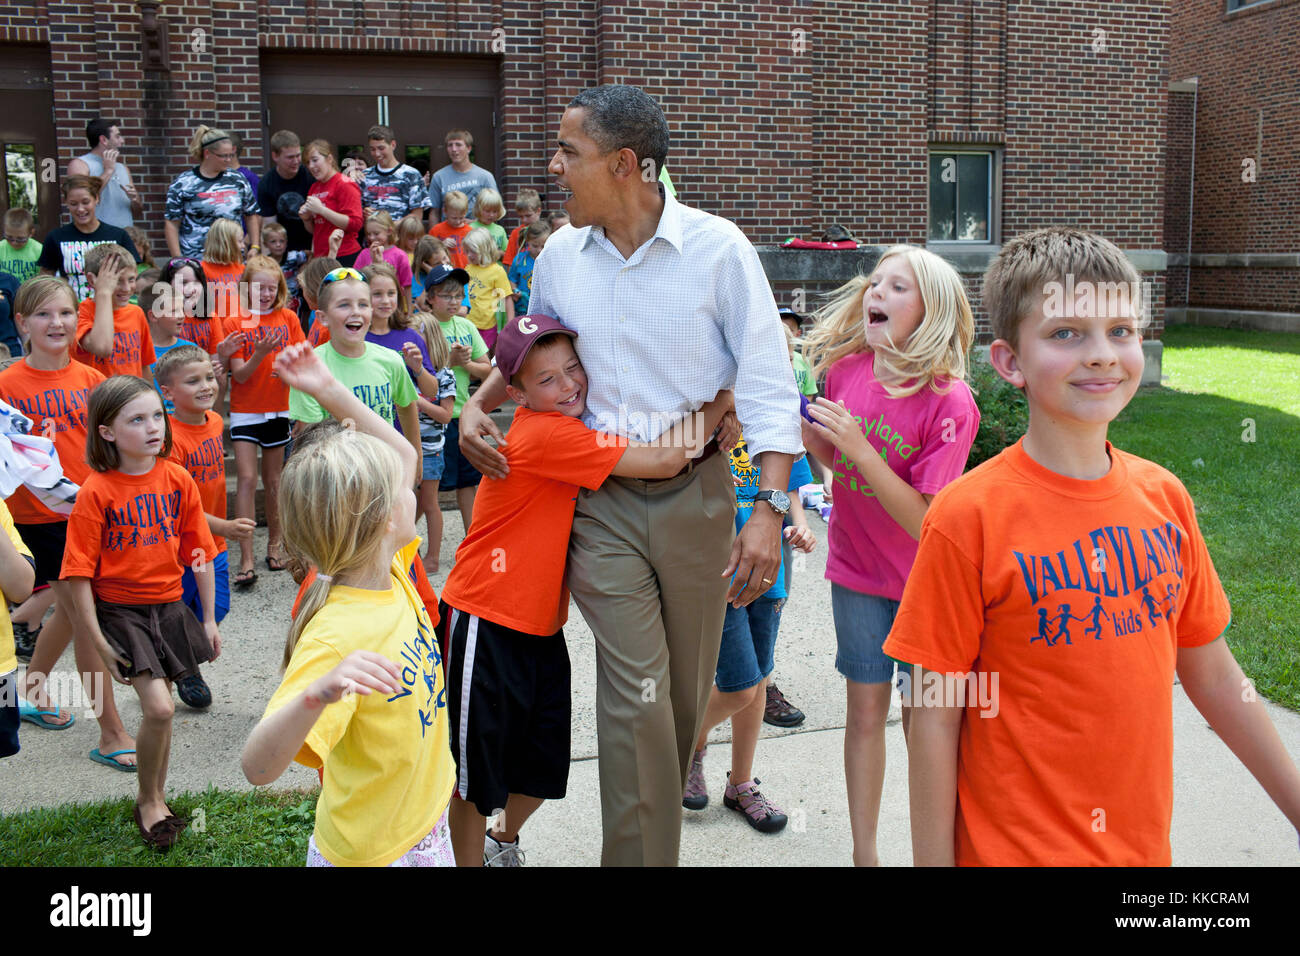 President Barack Obama greets children from the Valleyland Kids summer program outside a school in Chatfield, Minn., during a three-day bus tour in the Midwest, Aug. 15, 2011. Stock Photo